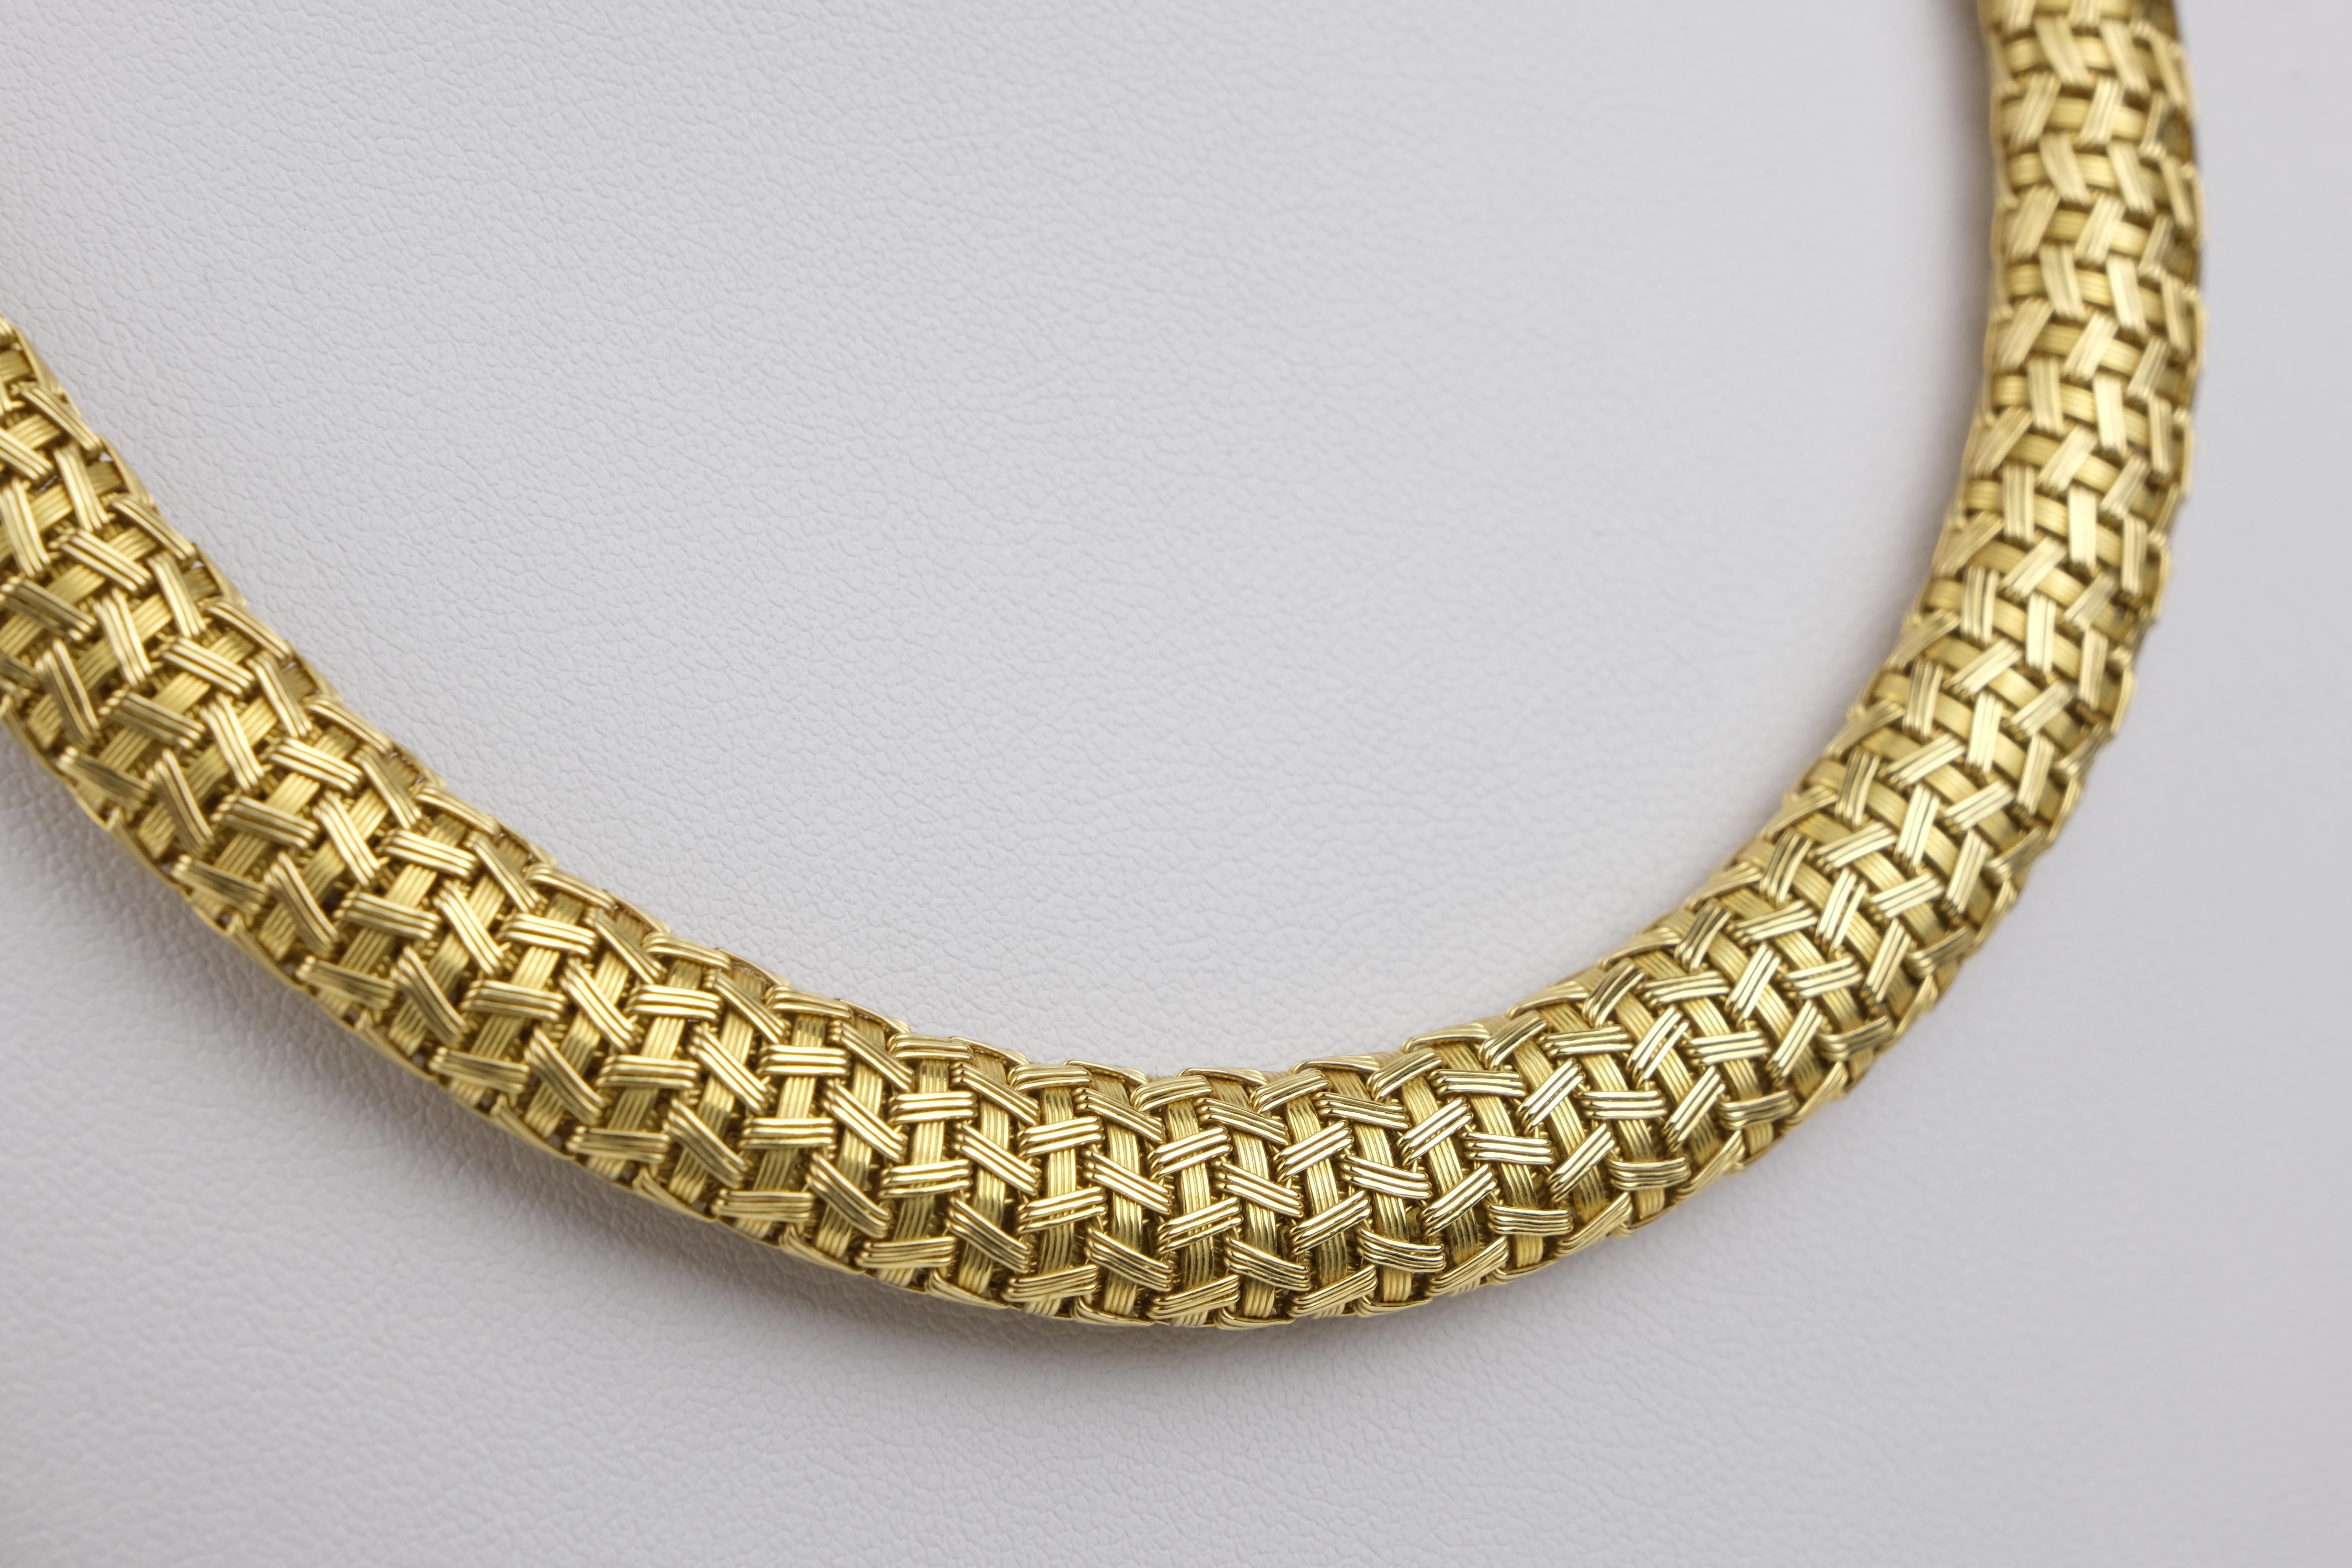 ITEM DETAILS

Style: Italian
Materials: 18K Gold
Chain Type: Woven
Necklace Length: 17.00